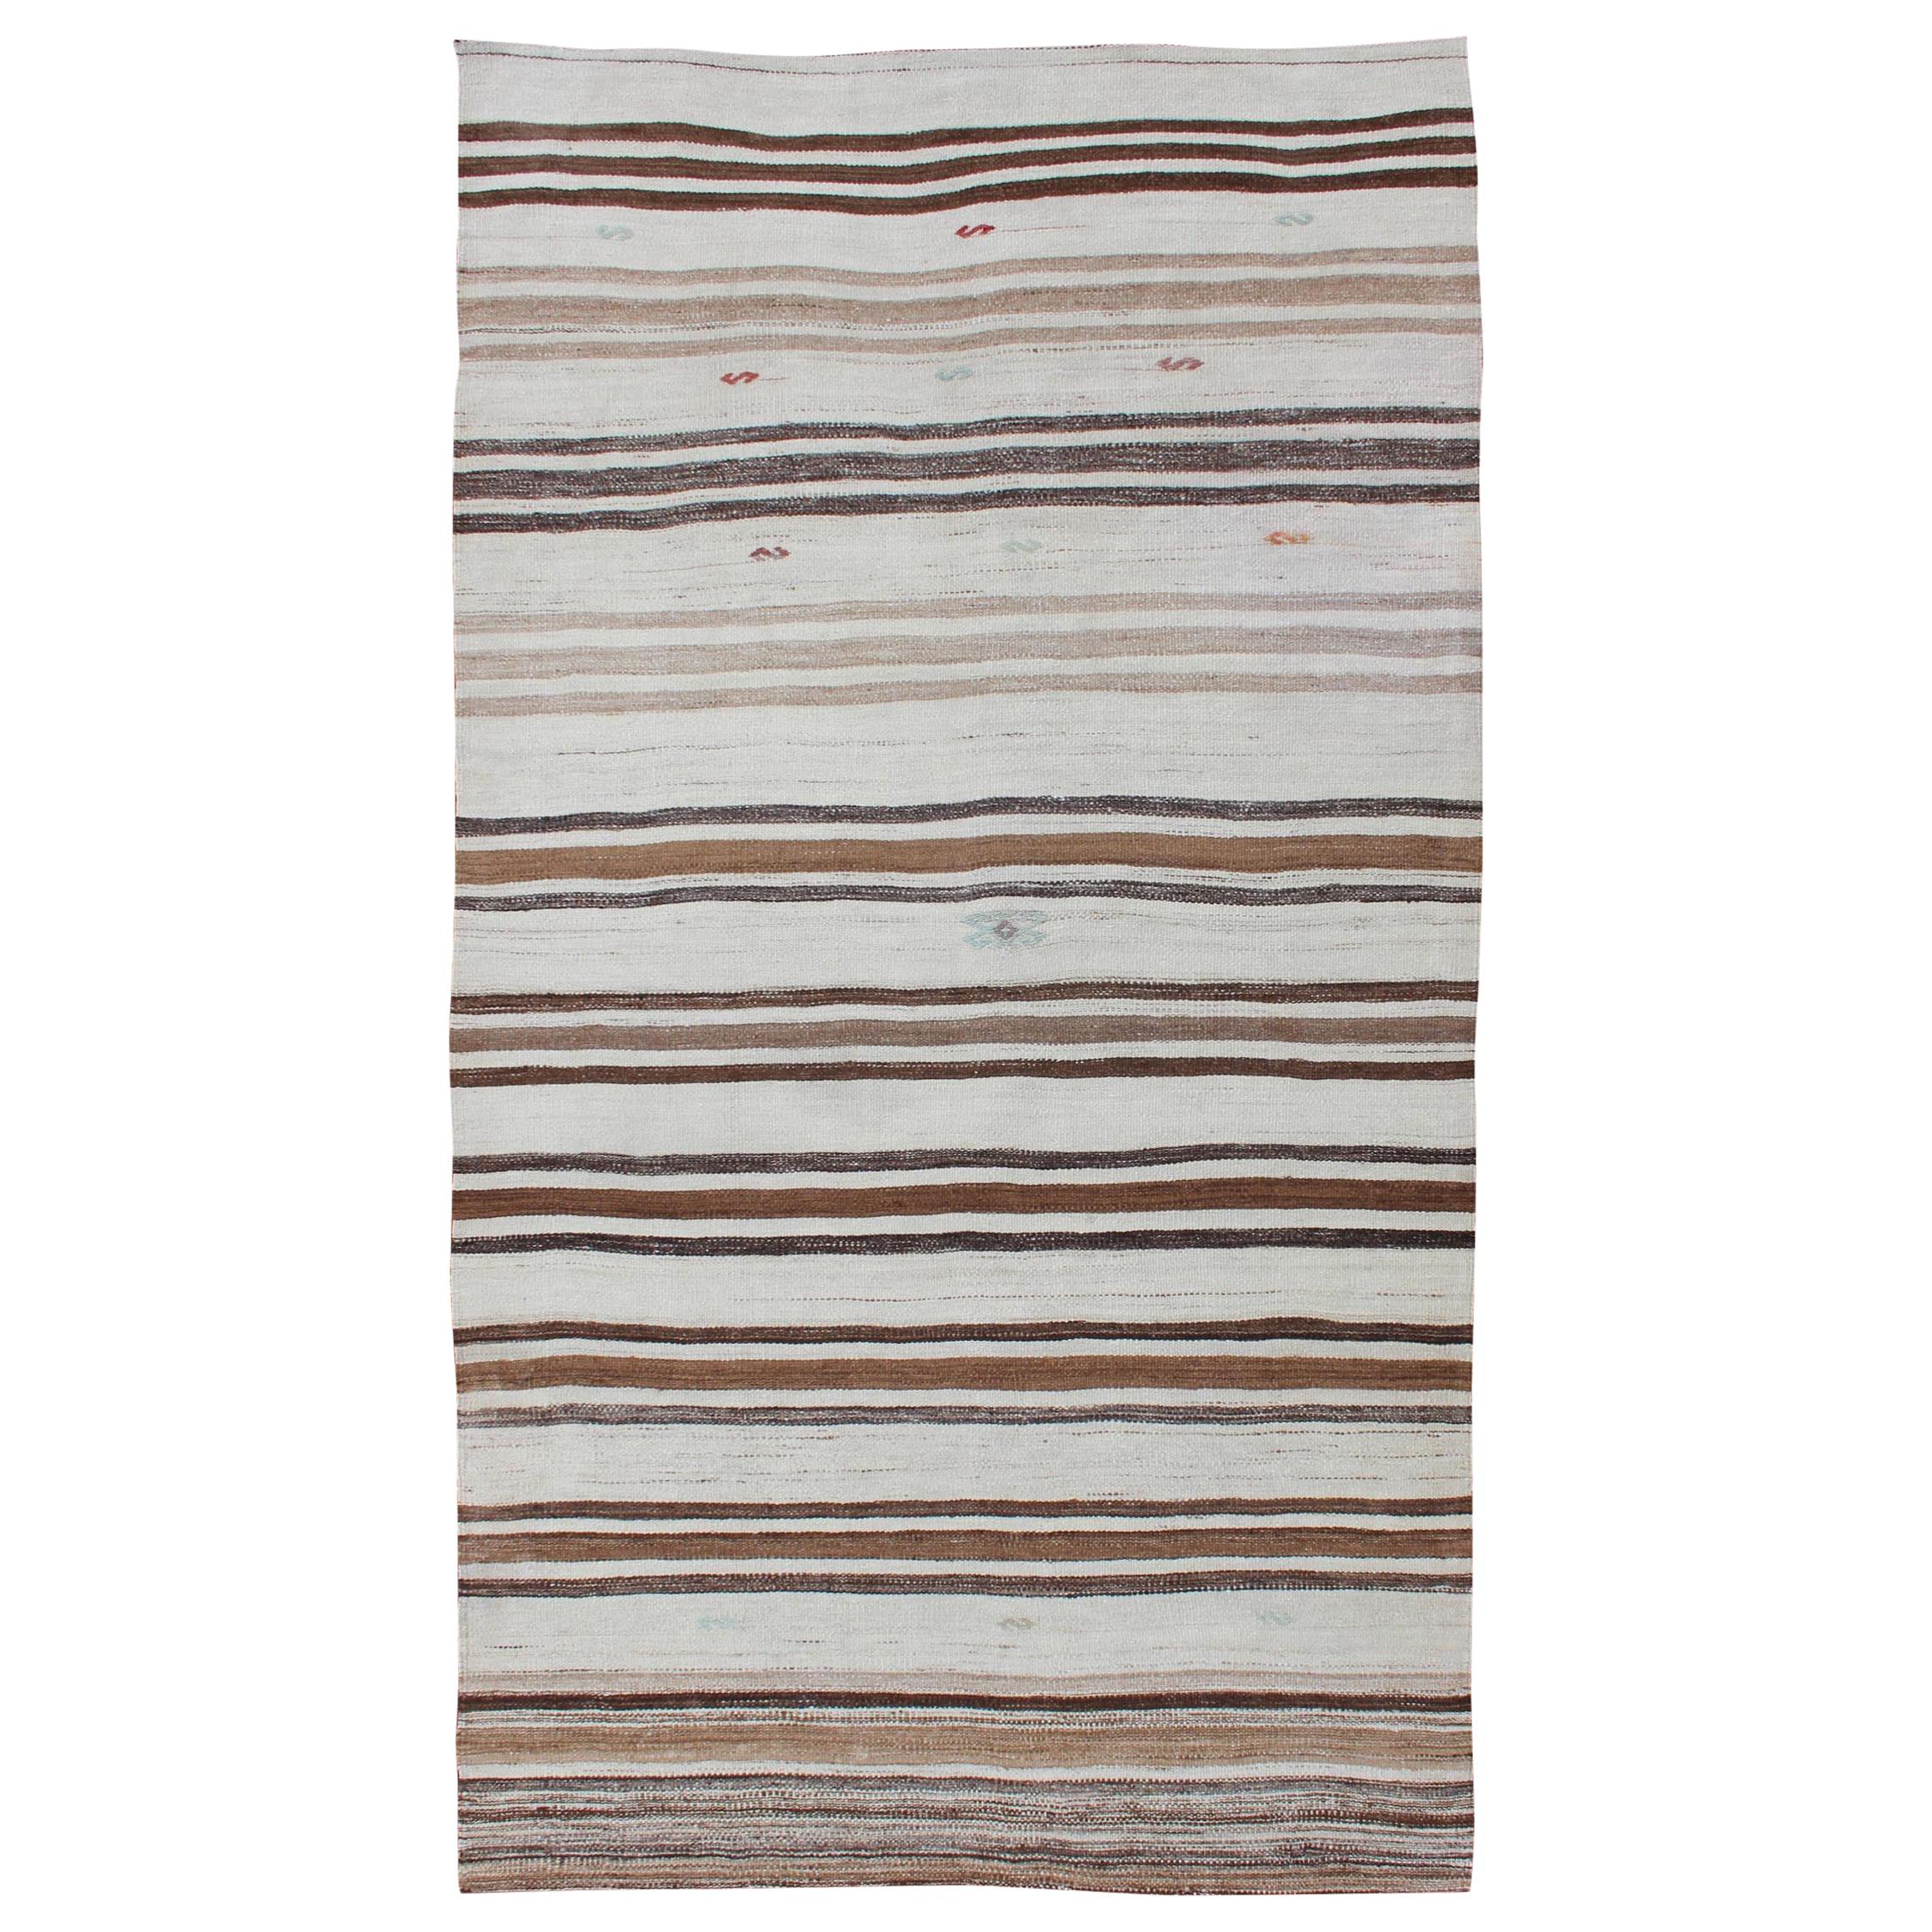 Striped Turkish Vintage Kilim Flat-Weave Rug in Shades of Browns Taupe and Ivory For Sale